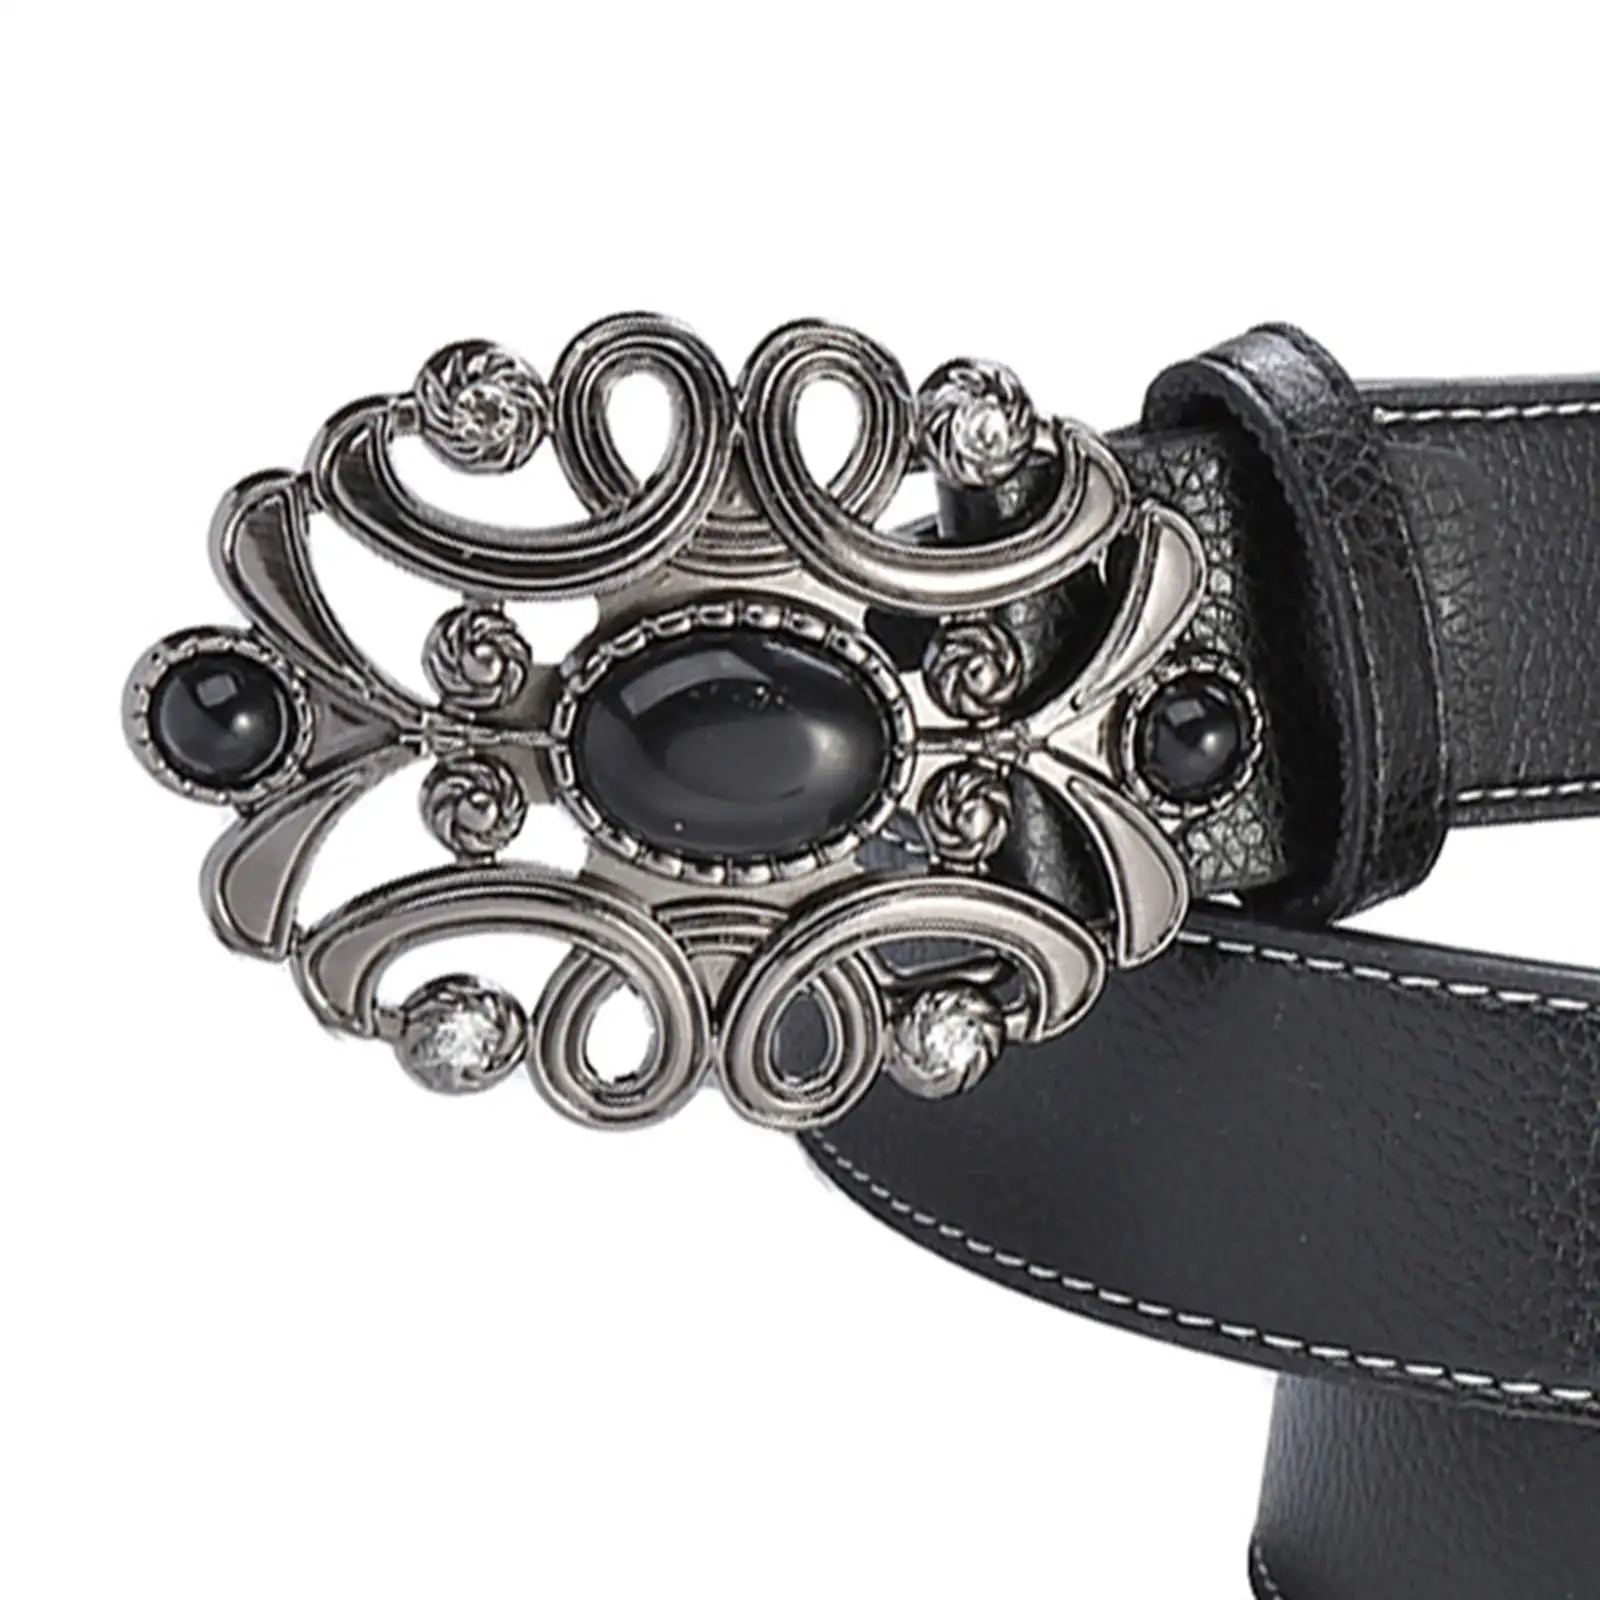 Fashion Western Belt with Buckle Mens Belt Waistband for Husband Birthday Gifts Gift